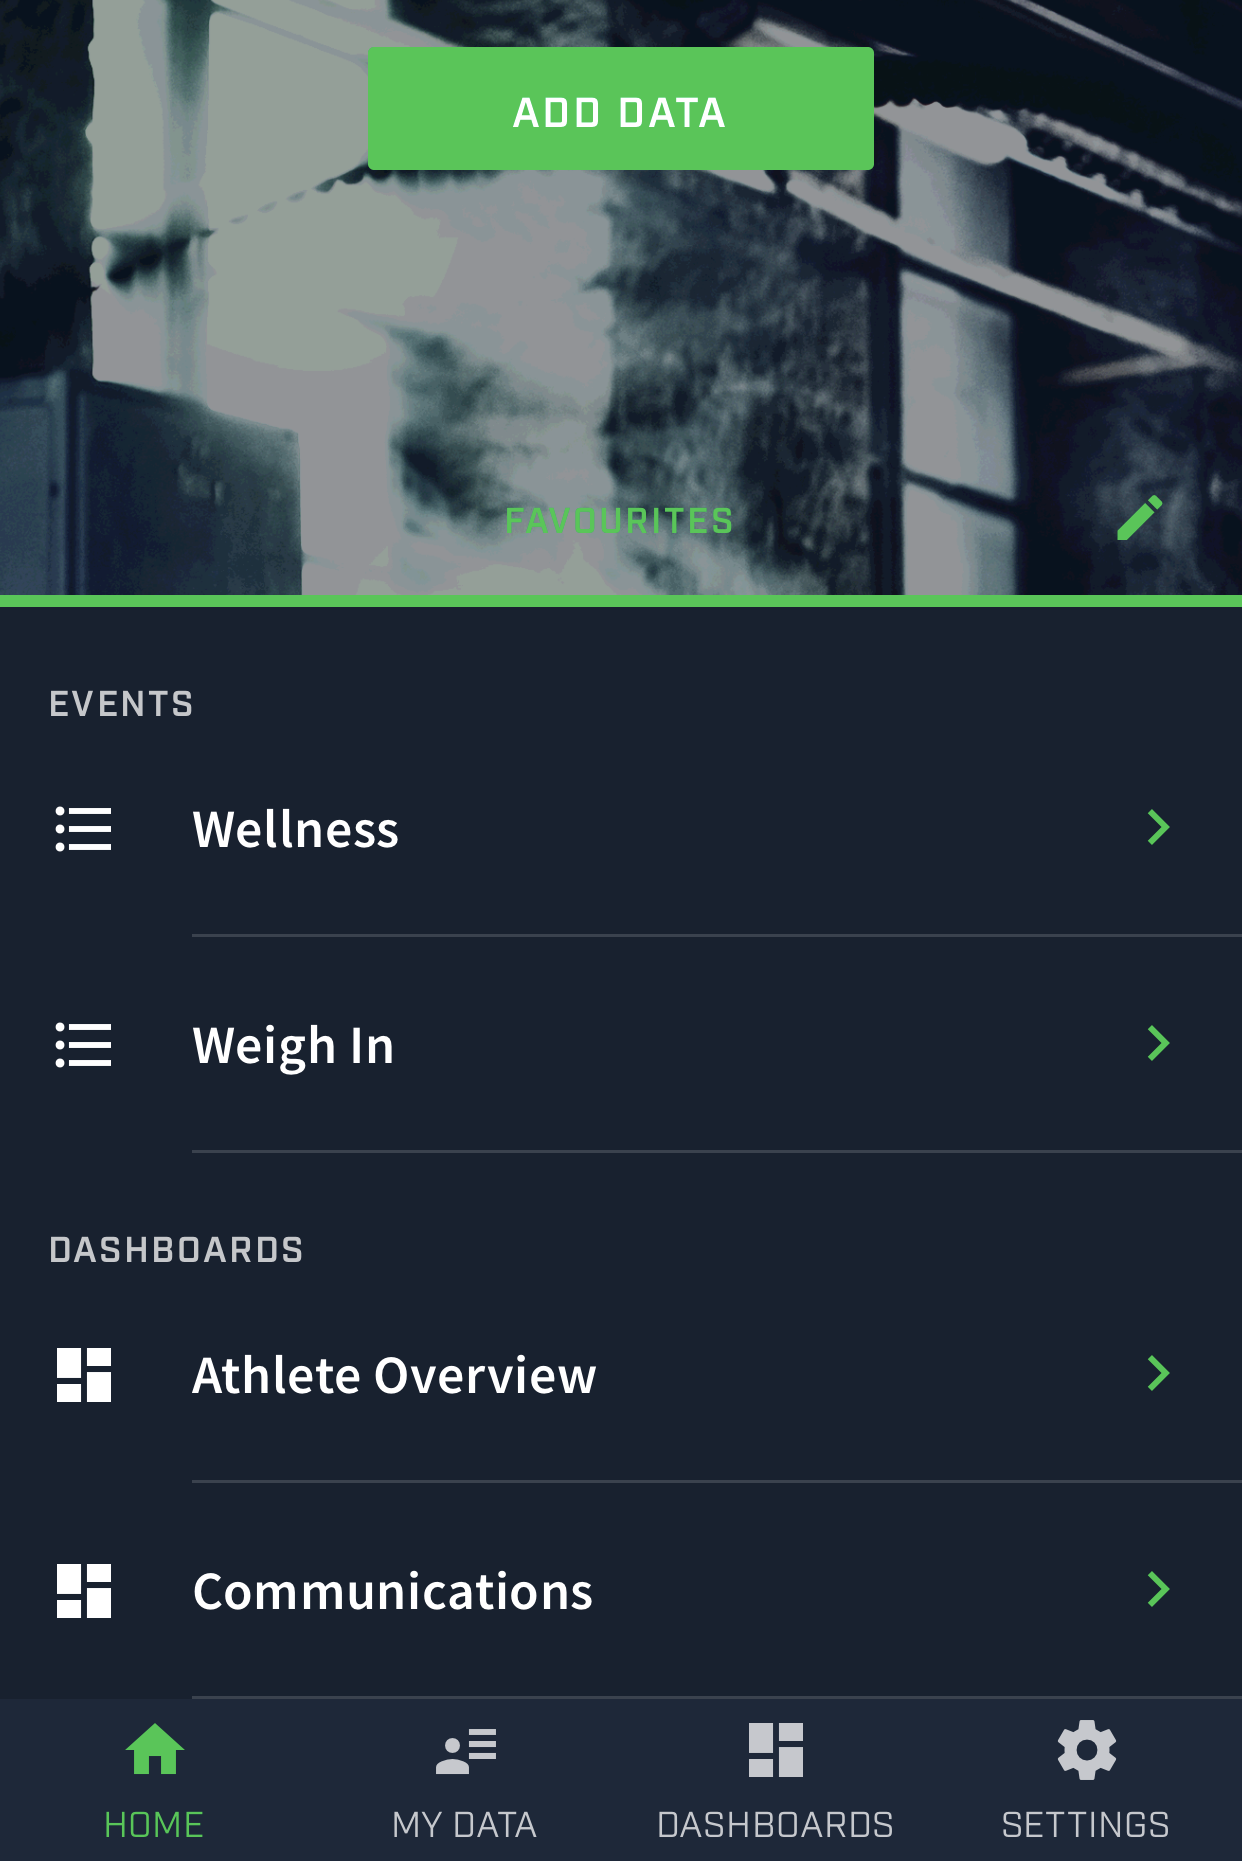 A screenshot from the Smartabase Athlete app showing an example of home screen with favourite events and dashboards available